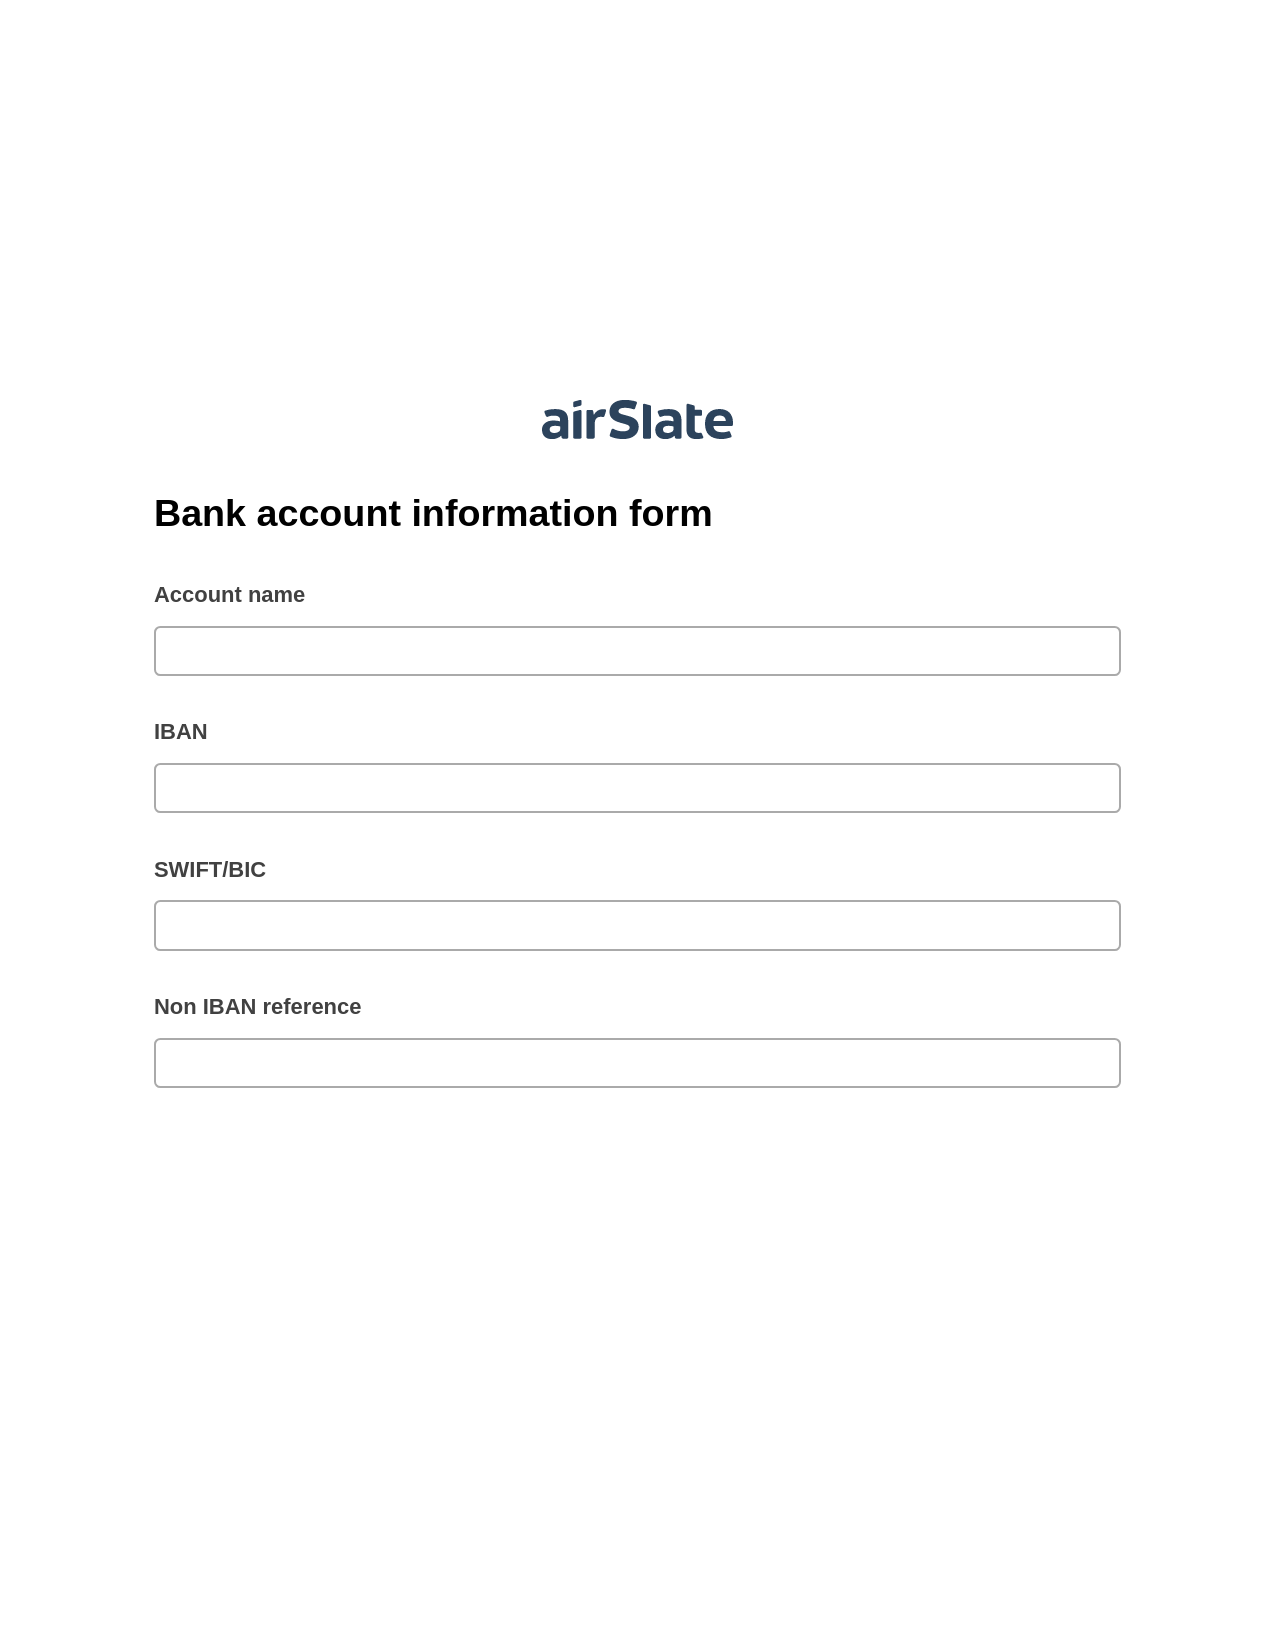 Multirole Bank account information form Pre-fill from Google Sheet Dropdown Options Bot, Send a Slate to Salesforce Contact Bot, Export to NetSuite Record Bot